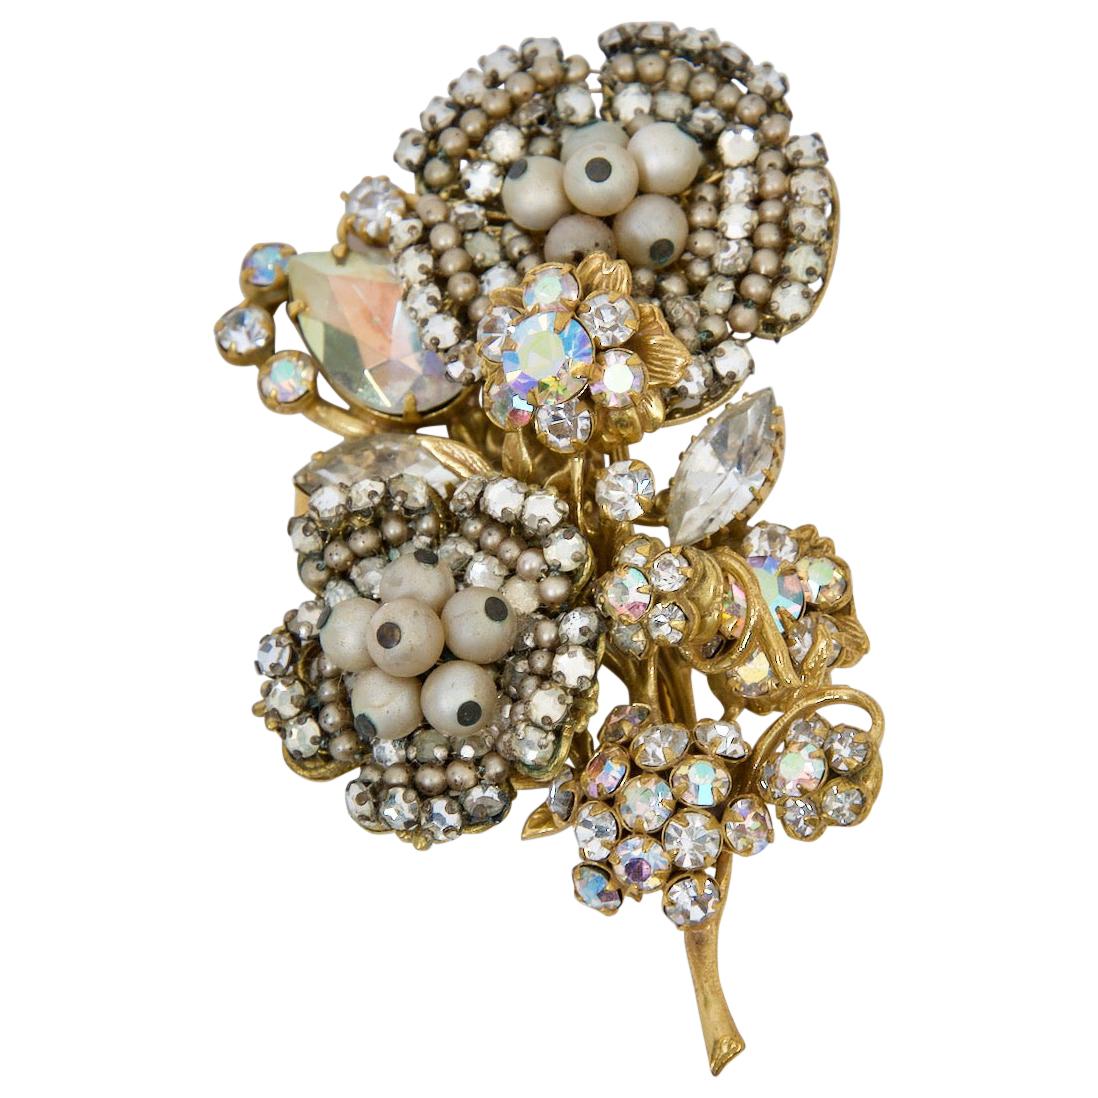 Original by Robert Floral Brooch with Crystals and Pearls For Sale